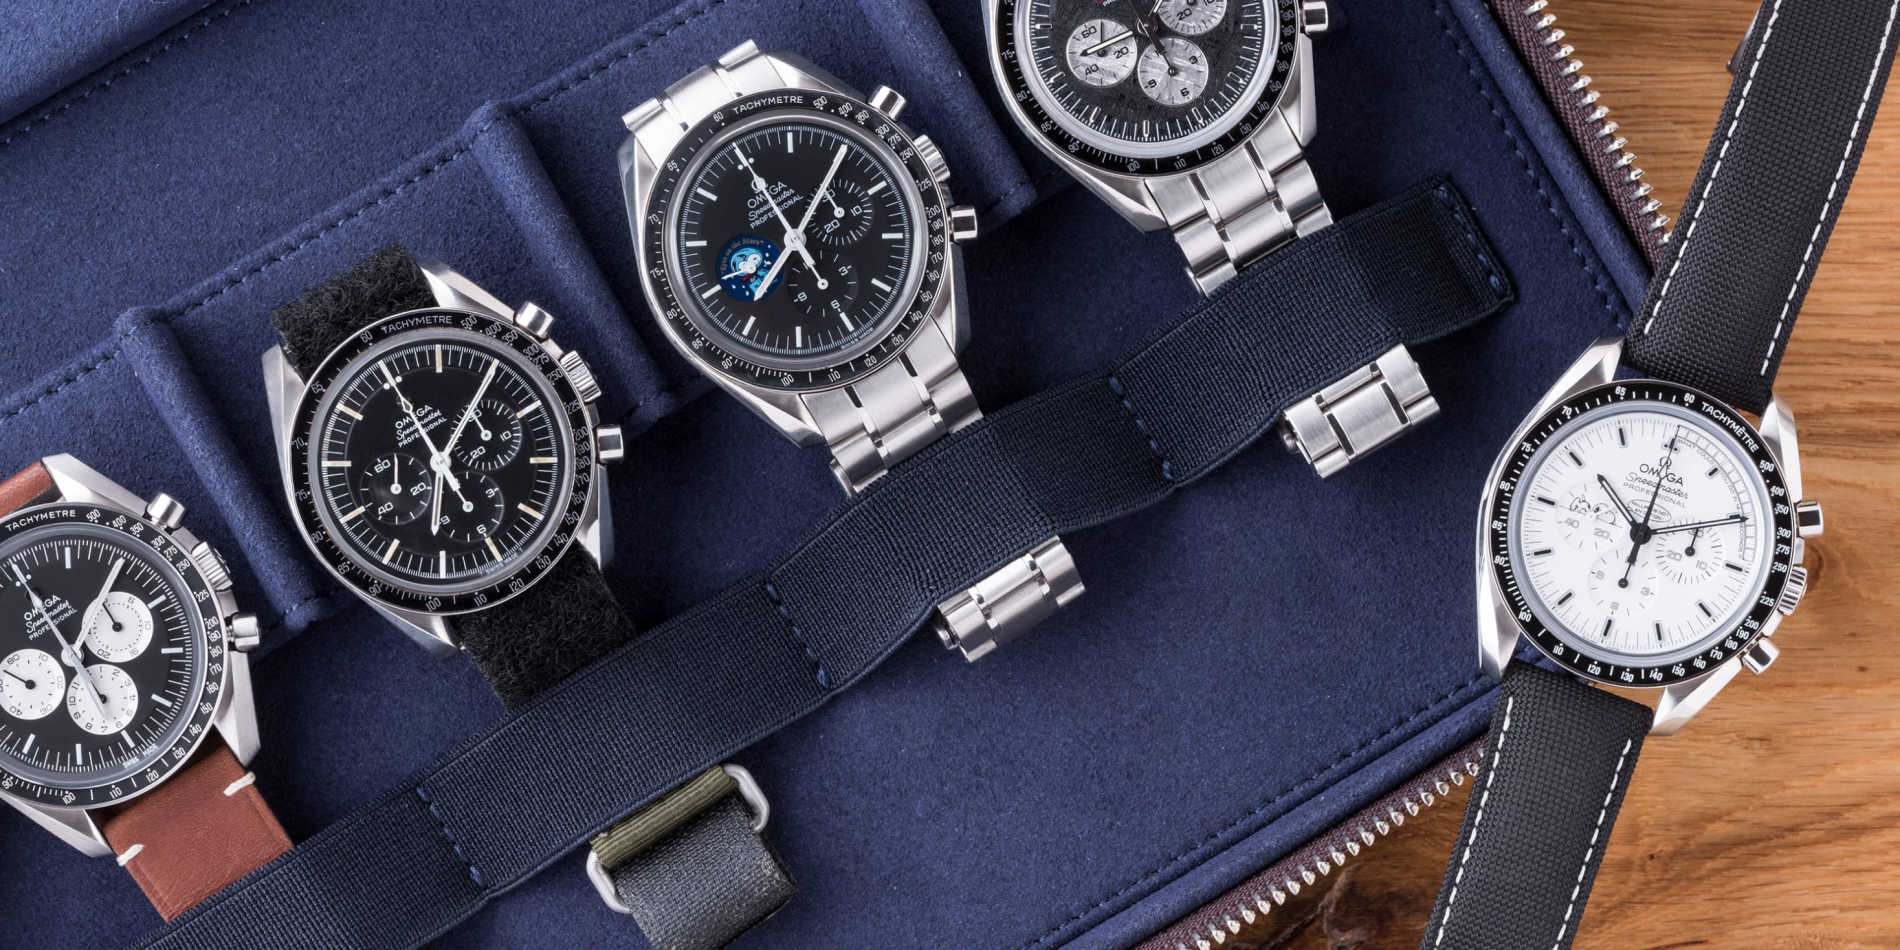 Main image with luxury vintage watches, Chrono24